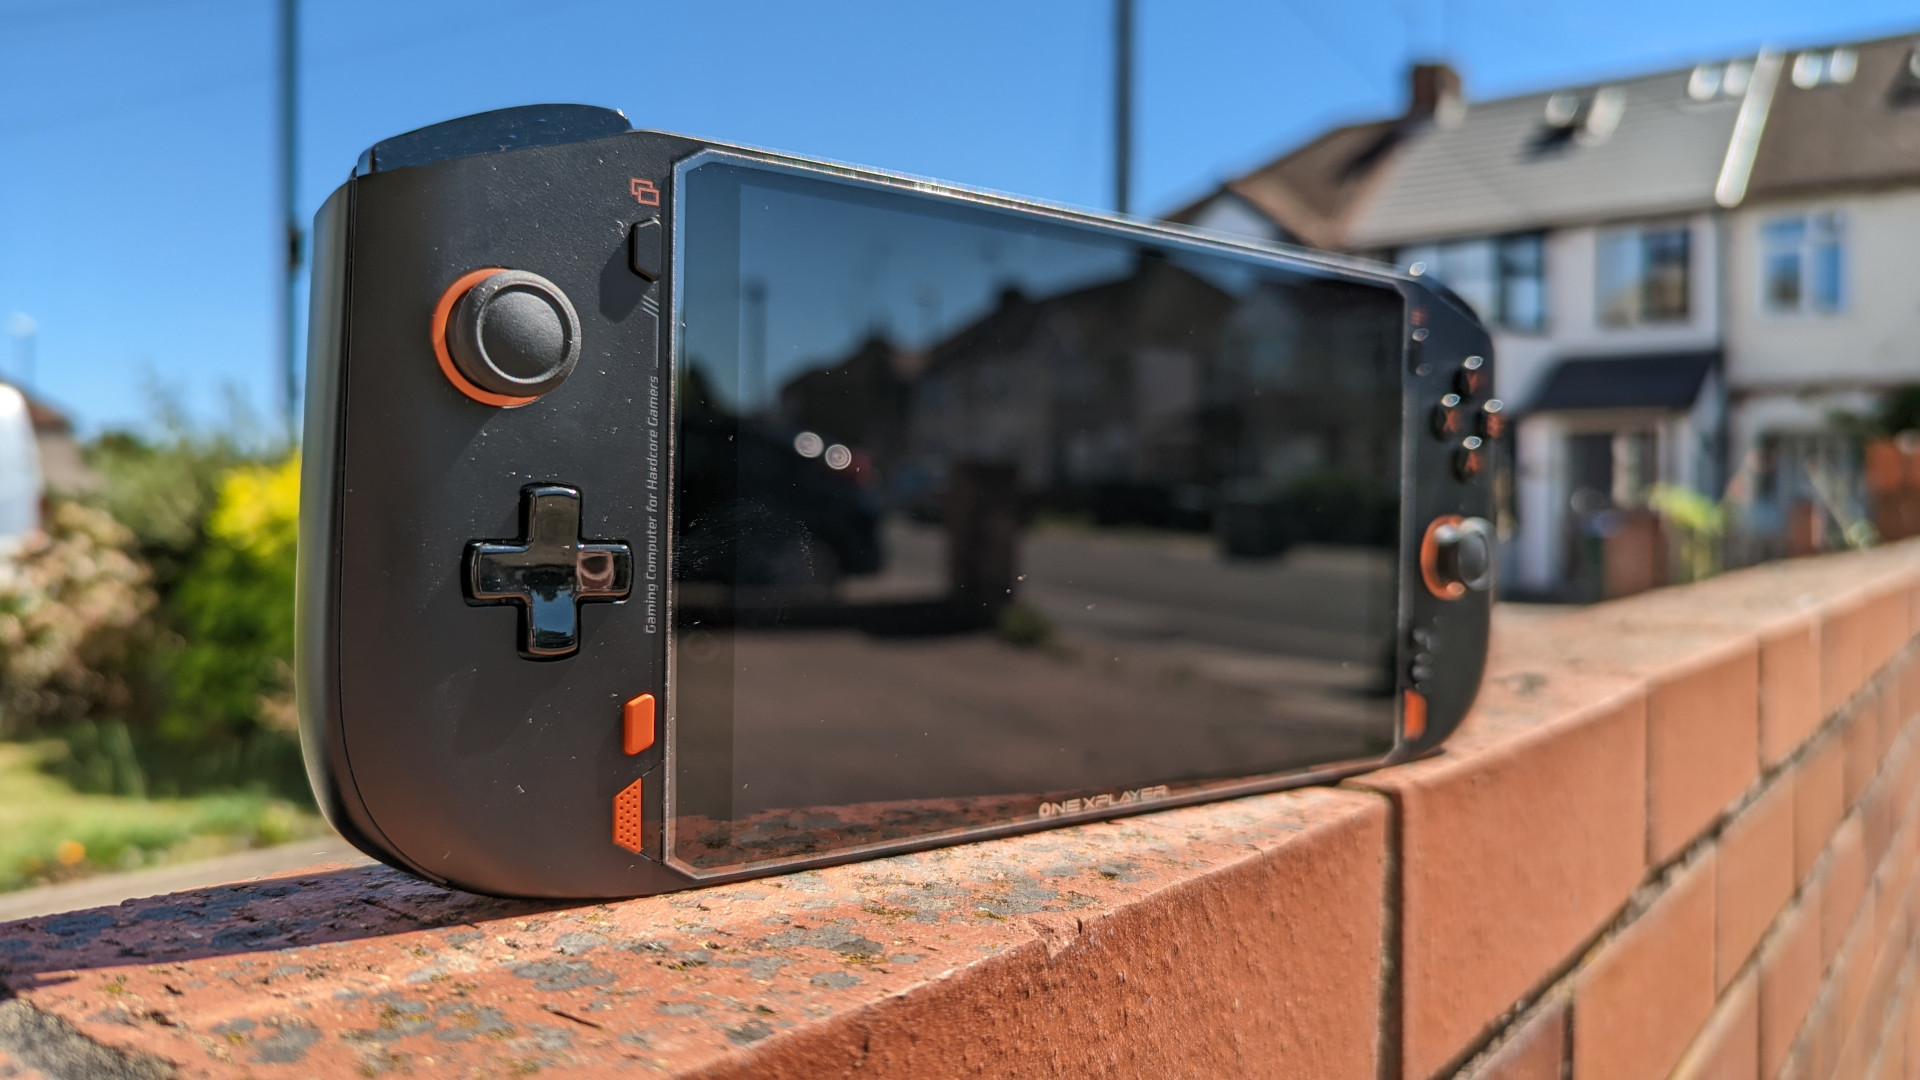 OneXPlayer Mini AMD review: the device sits atop a wall, with the sun beaming down on it